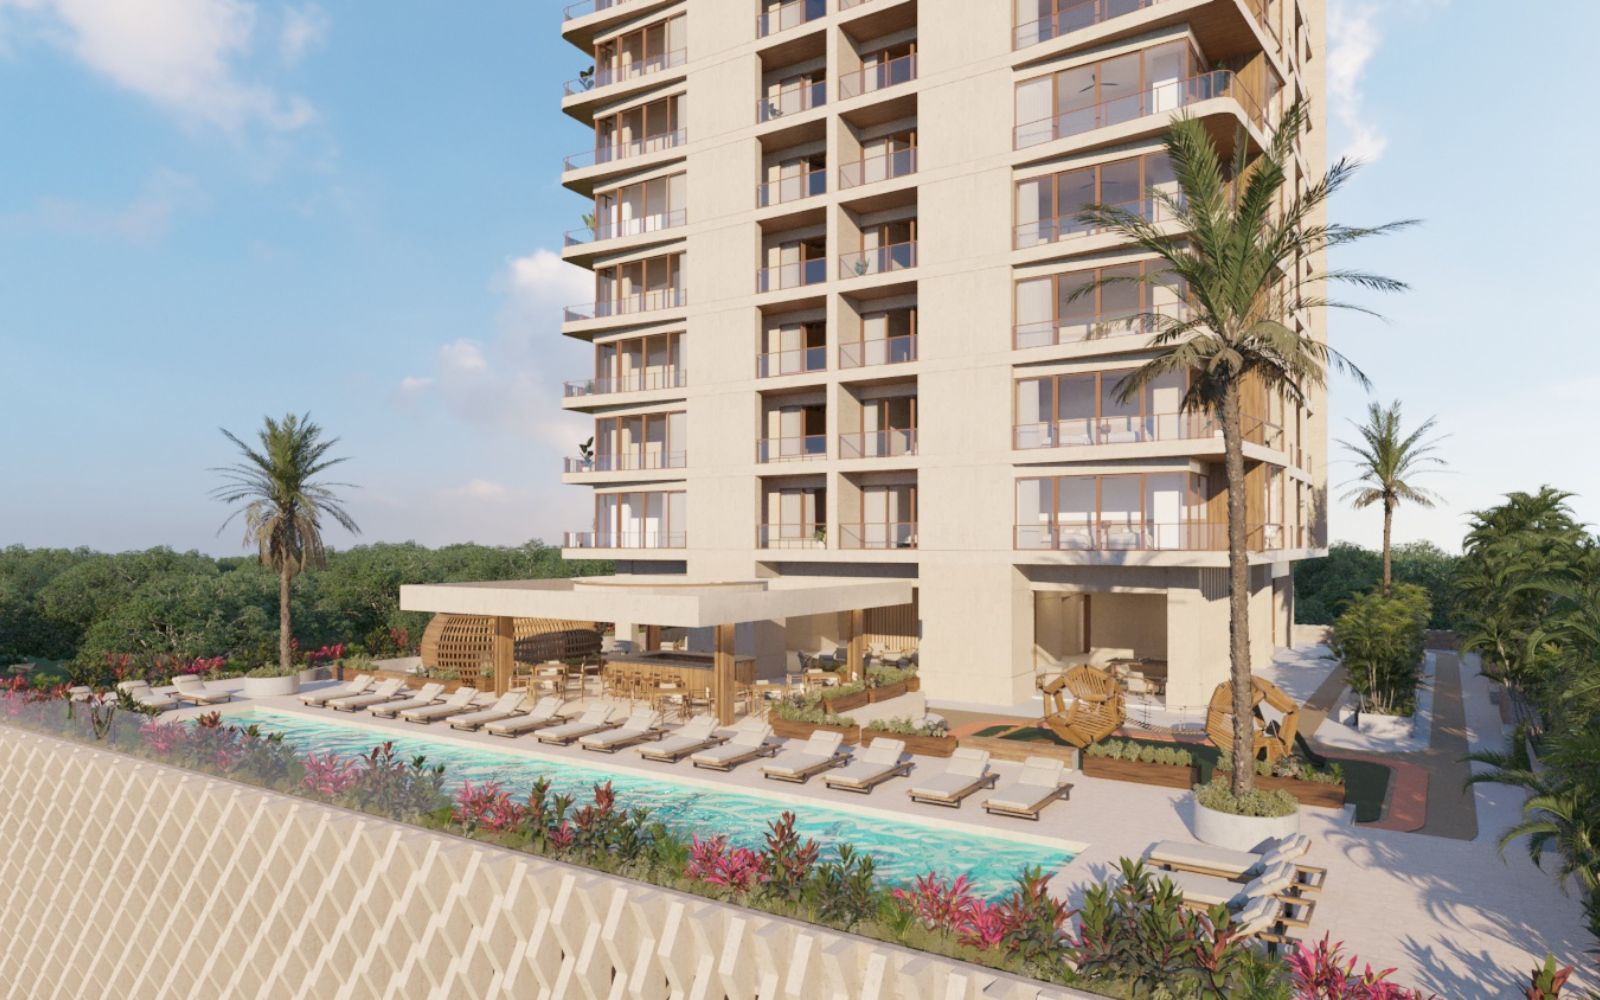 Condo with concierge, cinema, spa, gym, sky lounge, restaurant, dog area and more amenities in pre-construction, Cancun for sale.